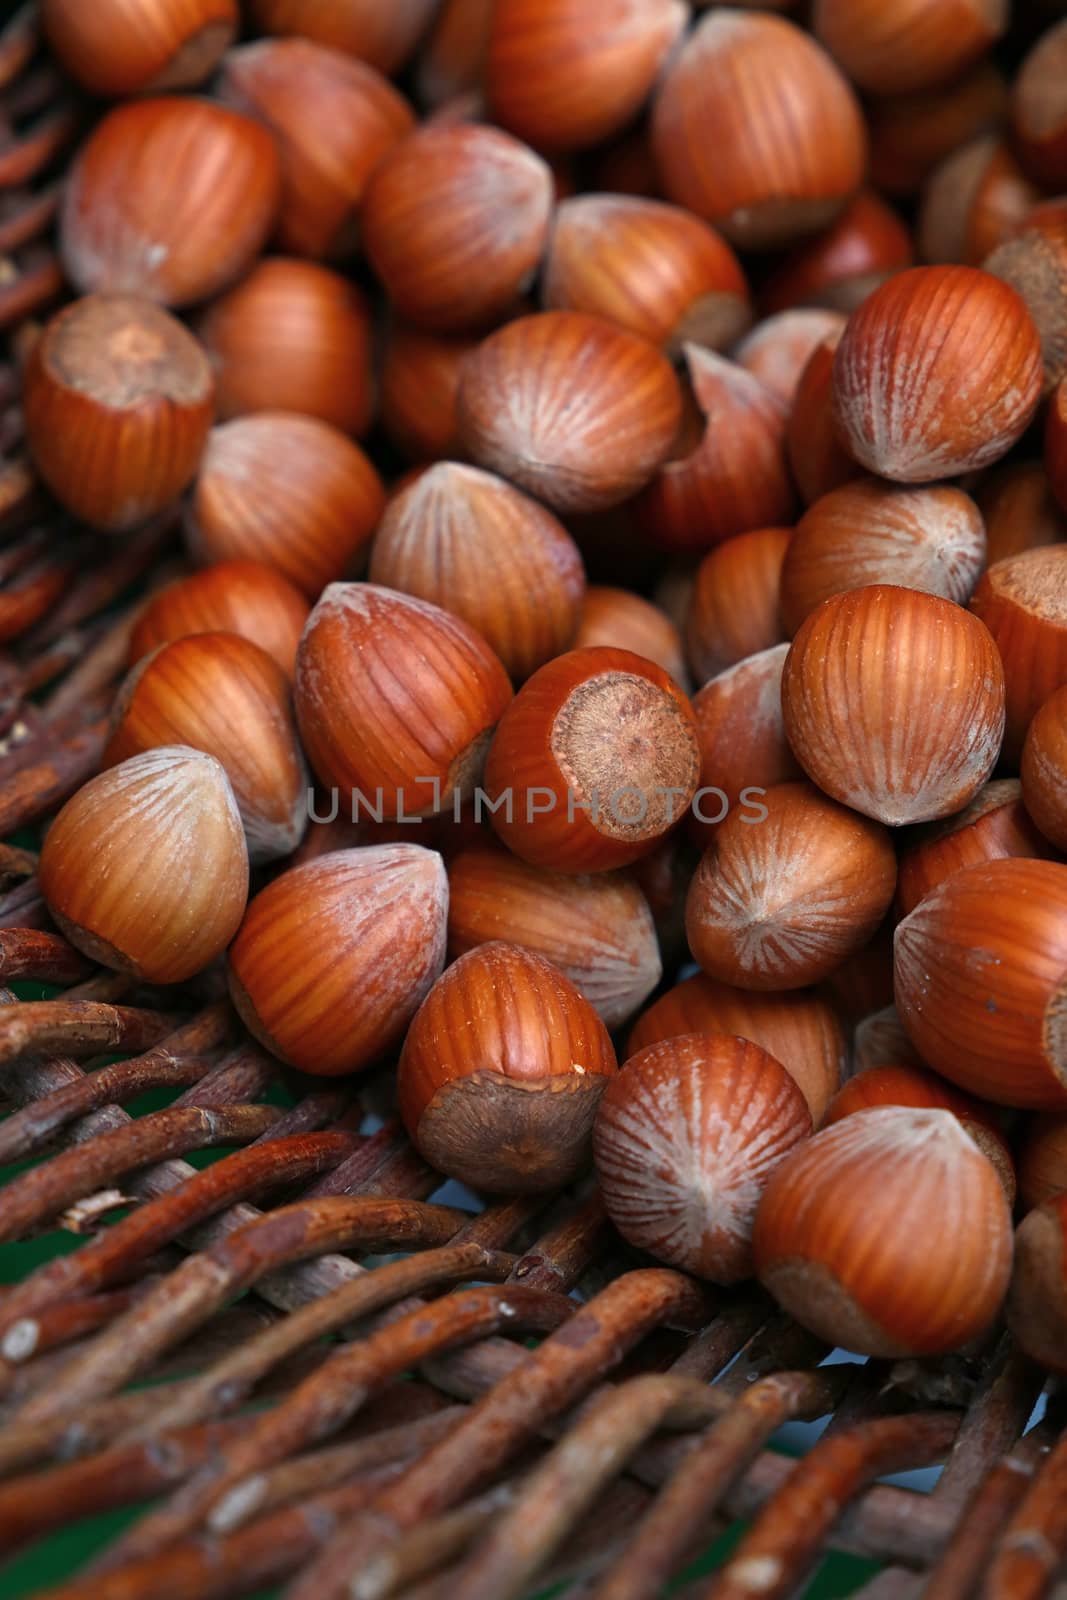 Whole big brown filbert hazelnuts with shell close up in wicker wooden rustic basket, high angle view